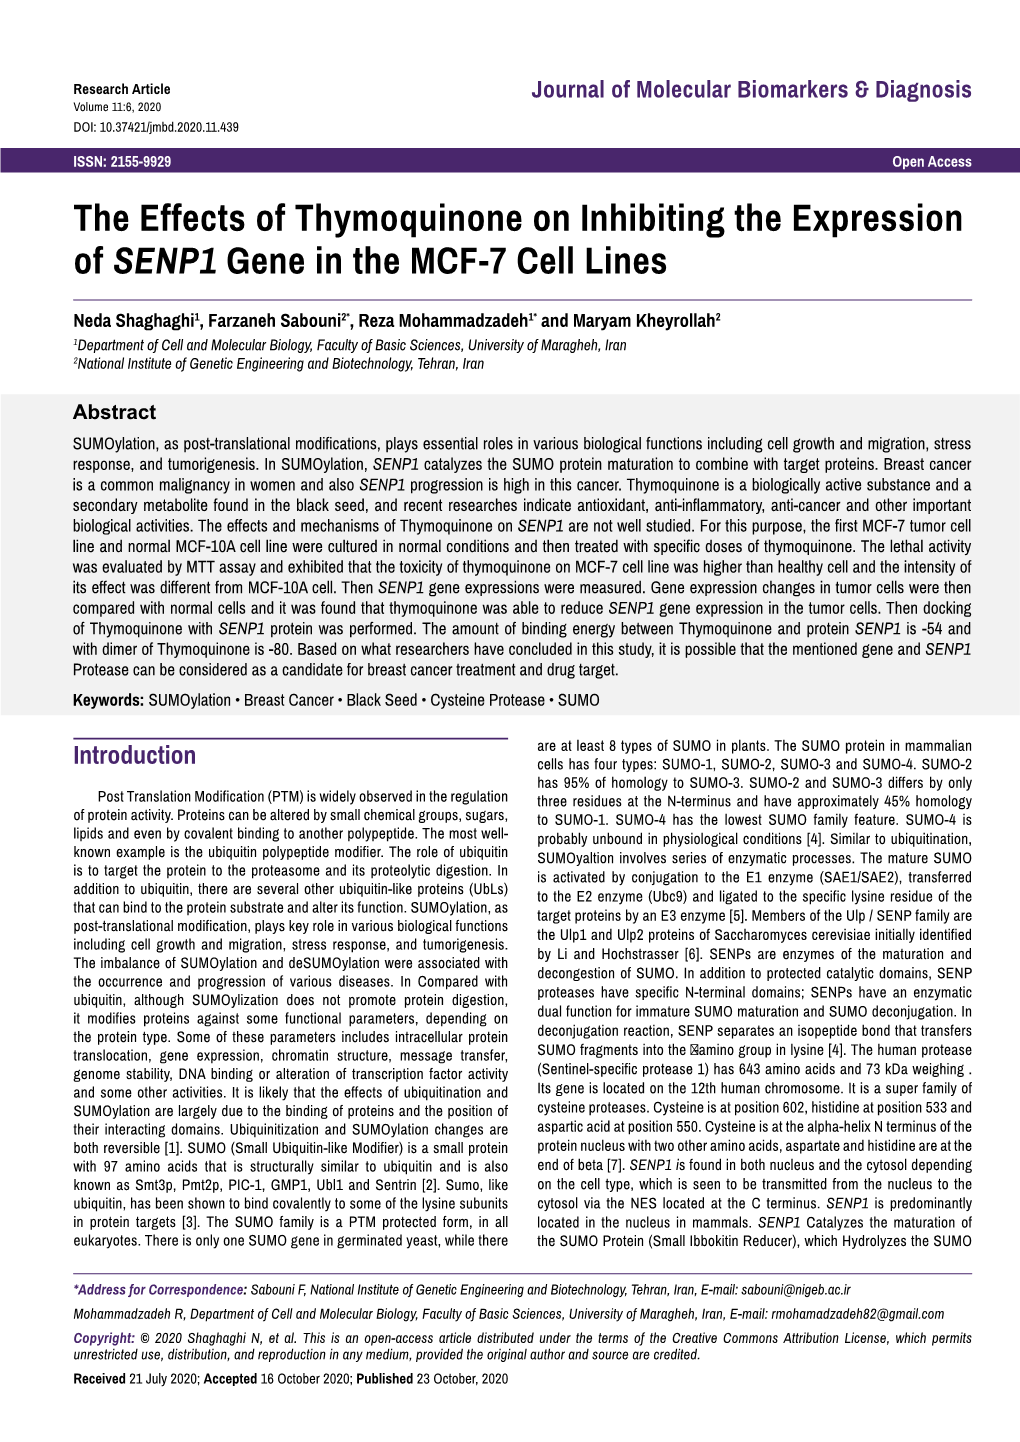 The Effects of Thymoquinone on Inhibiting the Expression of SENP1 Gene in the MCF-7 Cell Lines